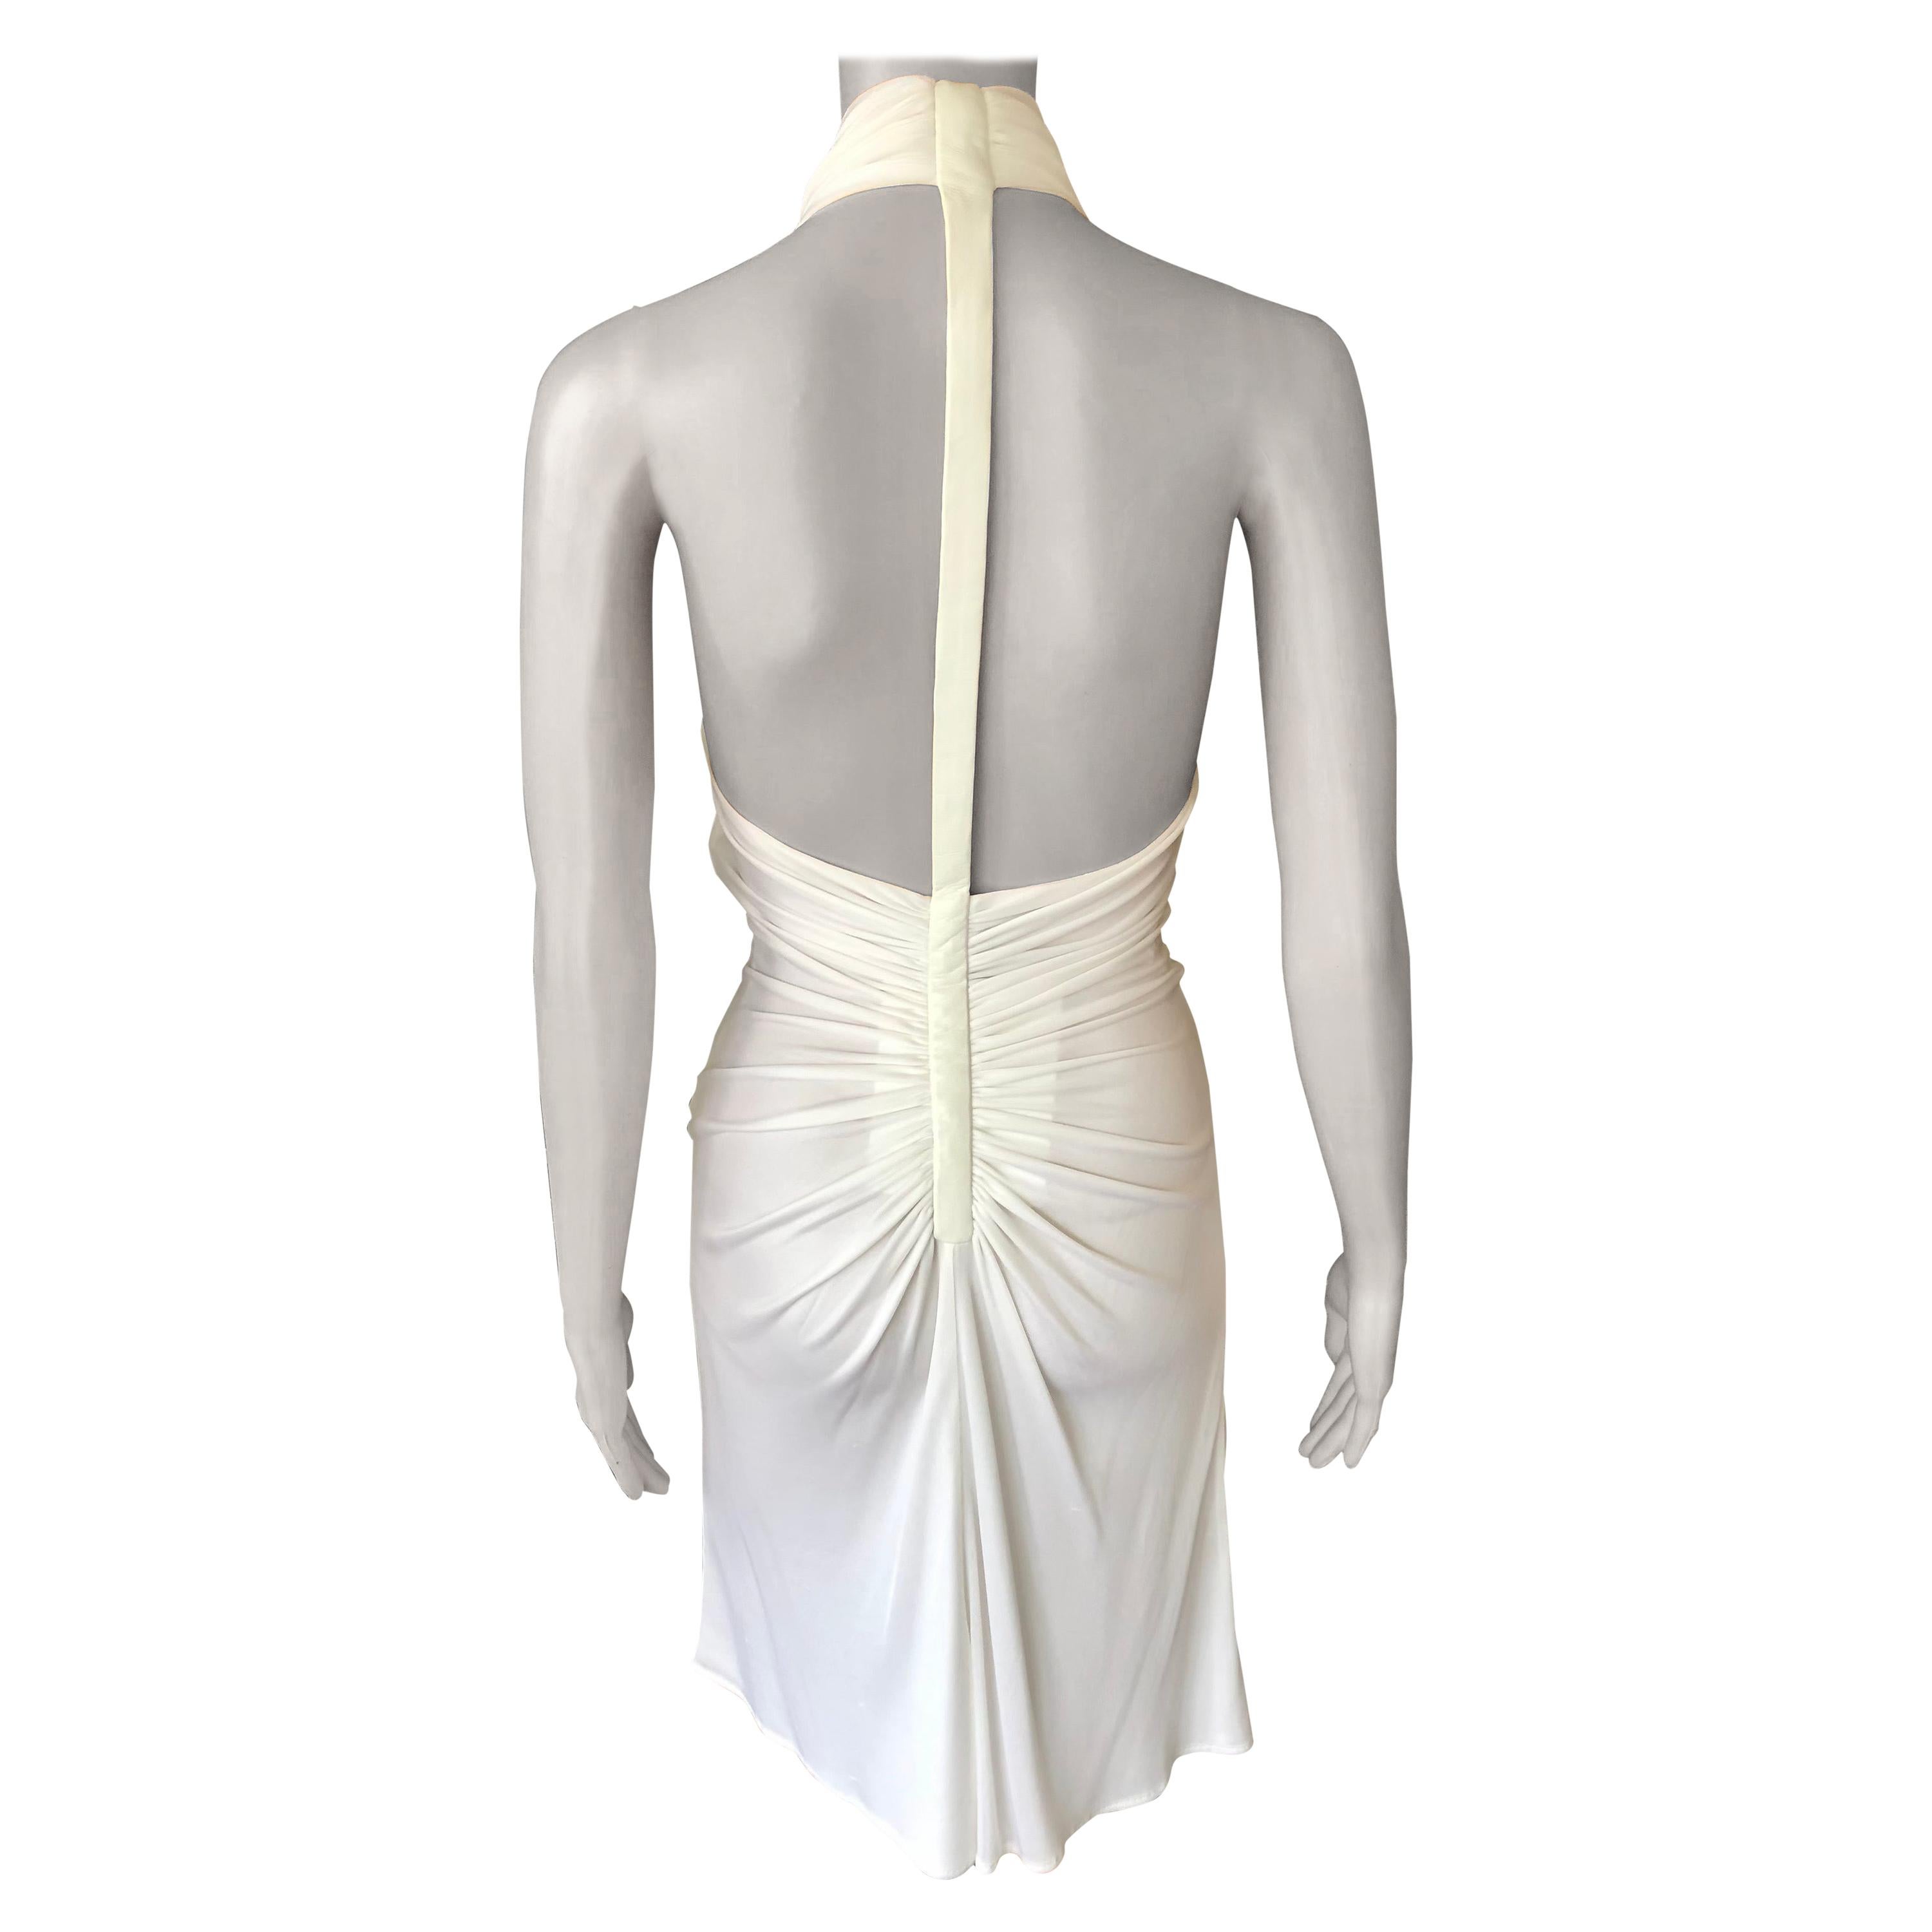 Gianni Versace S/S 2001 Runway Vintage Backless Plunged White Dress